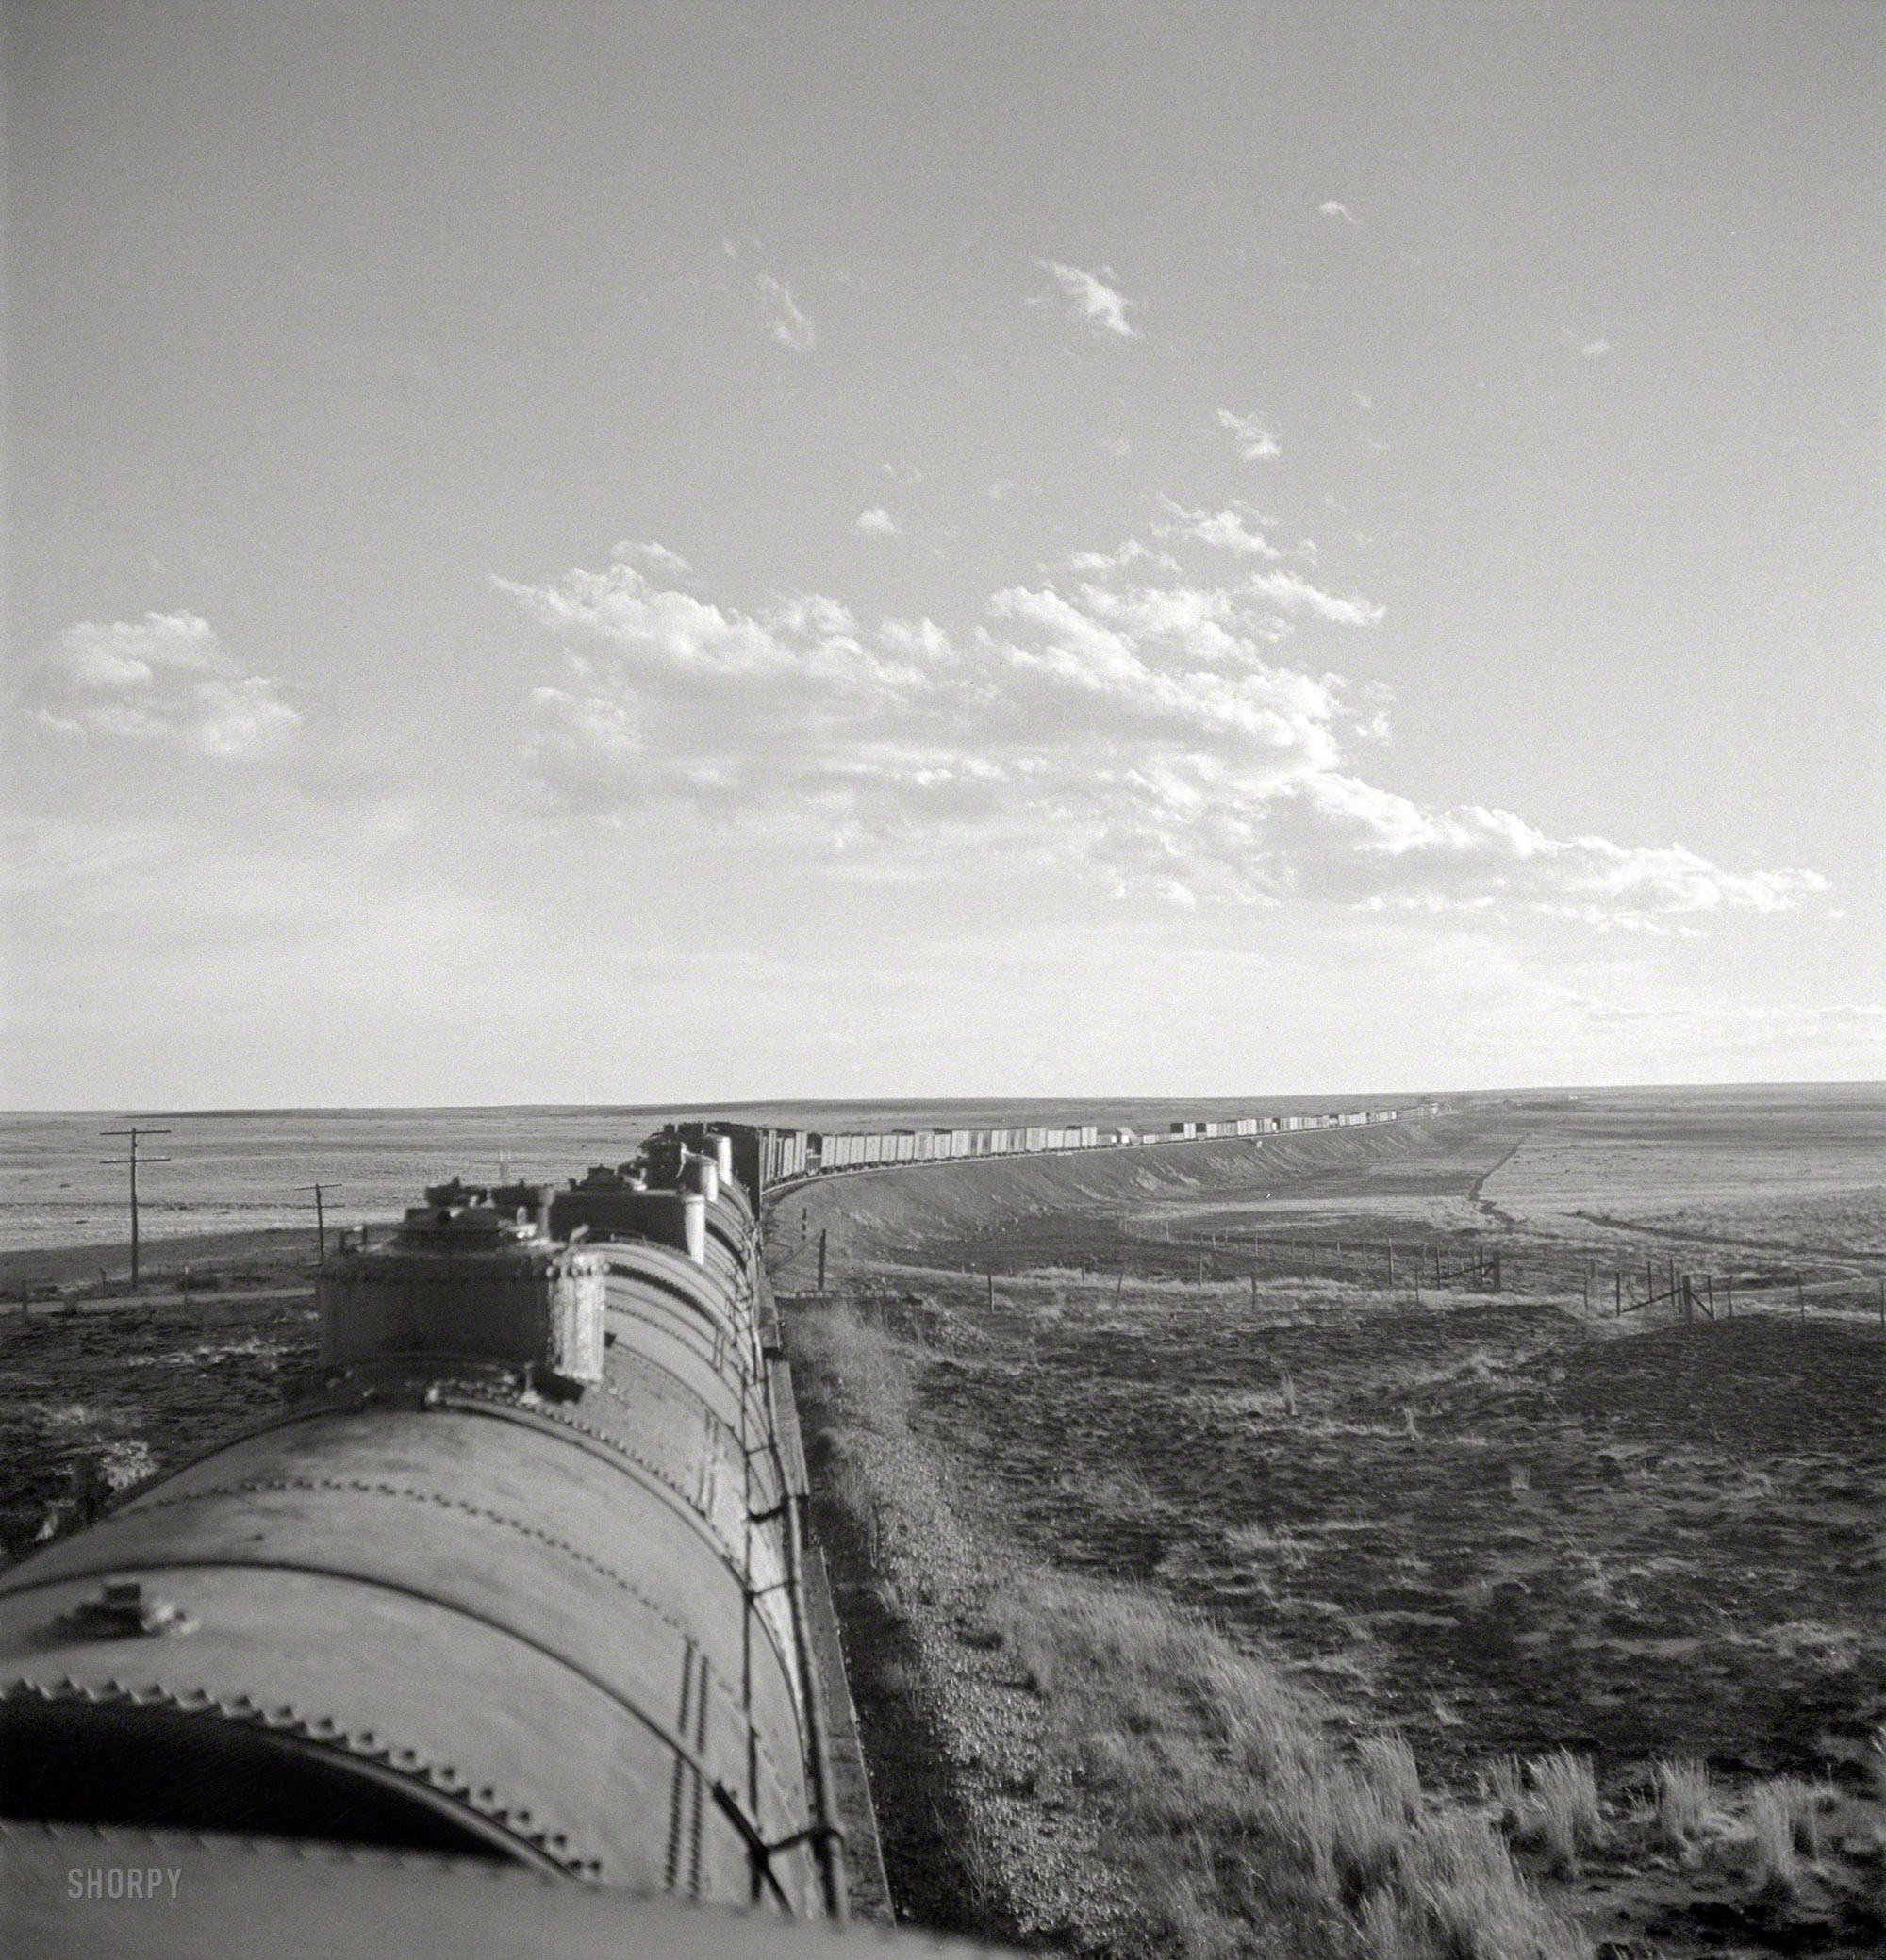 March 1943. "Duoro, New Mexico. Rounding a curve in the sheep and cattle country along the Atchison, Topeka & Santa Fe between Clovis and Vaughn, New Mexico." Photo by Jack Delano, Office of War Information. View full size.